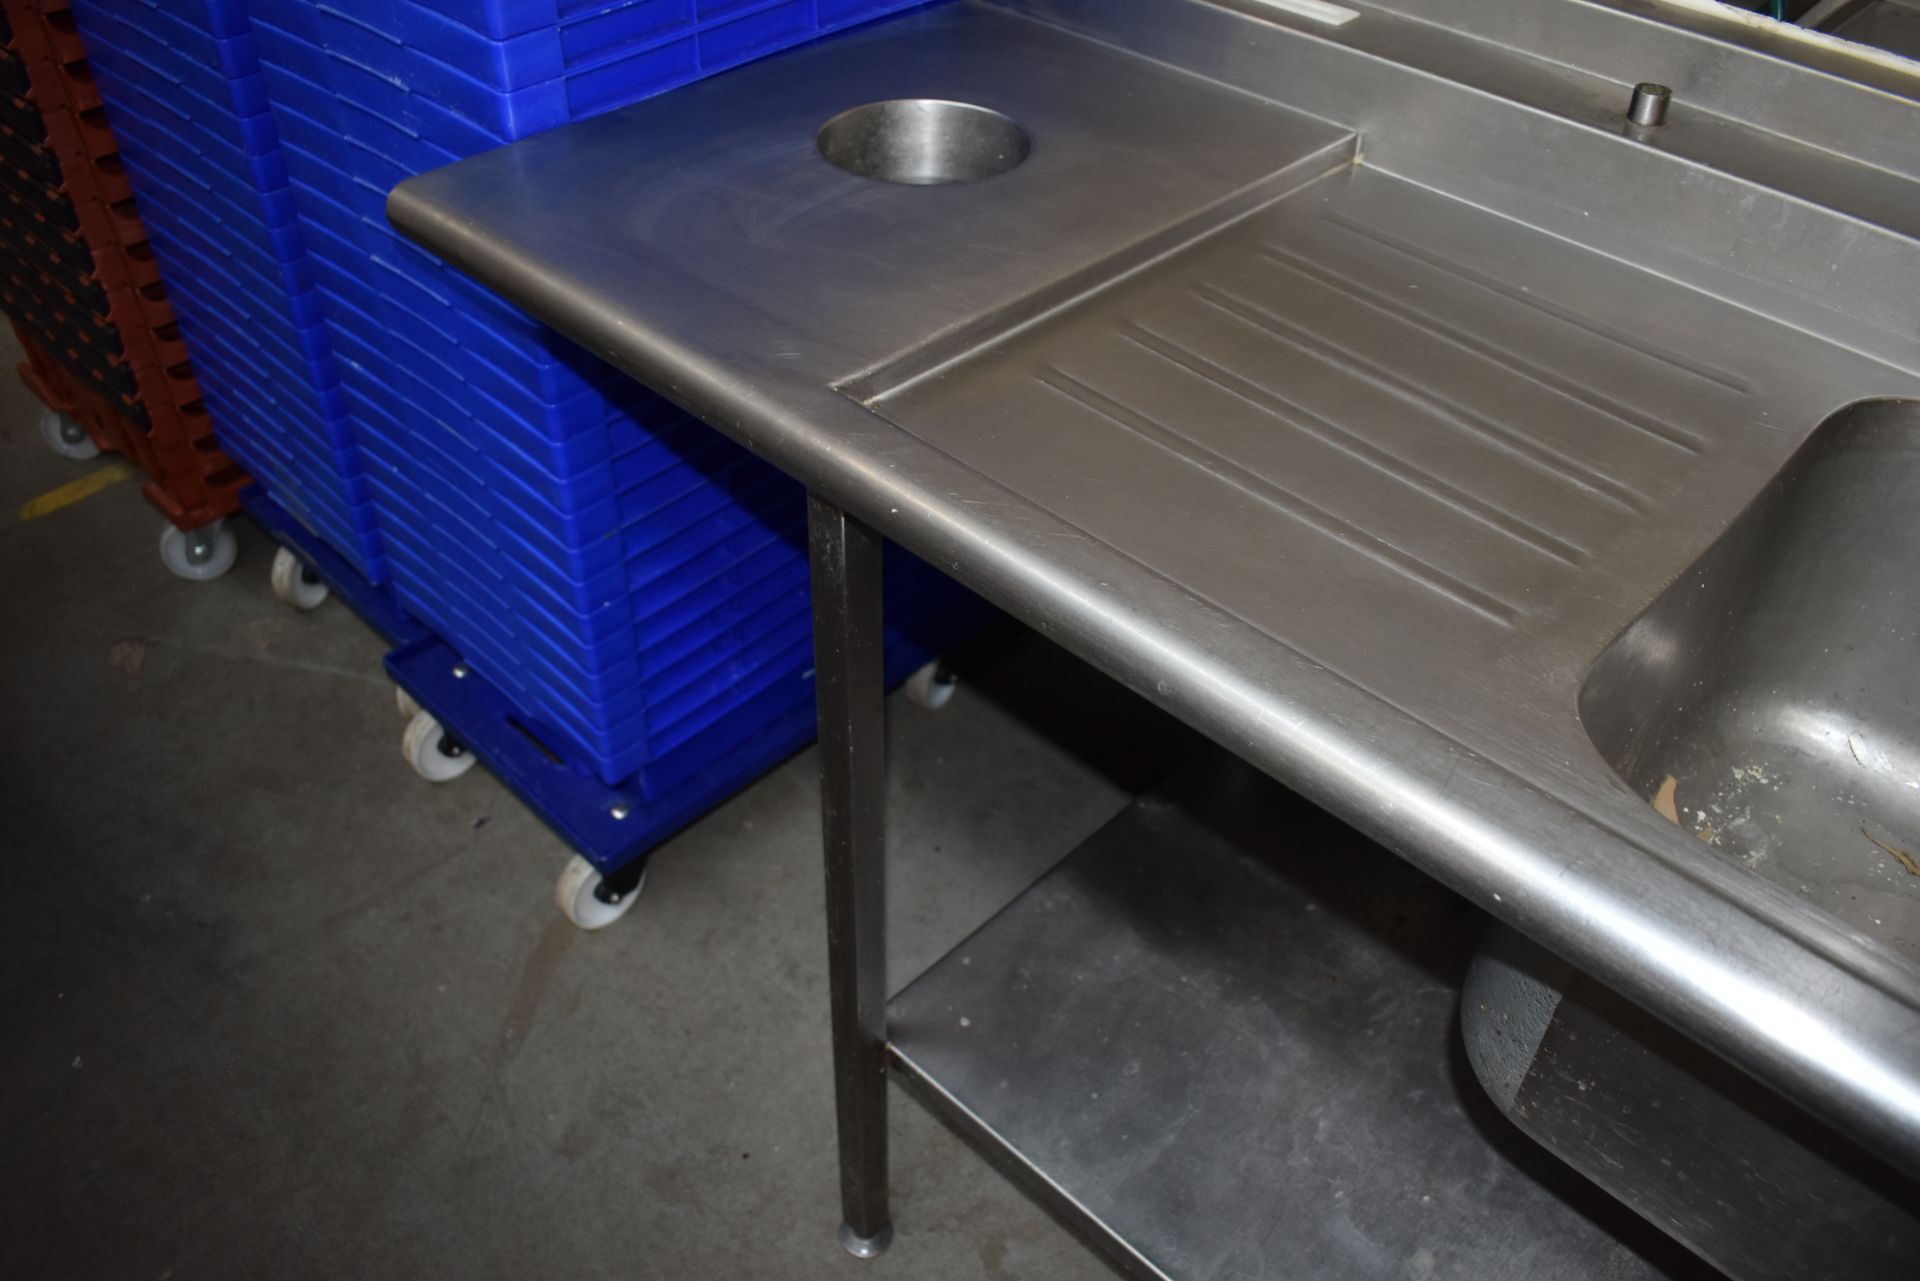 1 x Stainless Steel Commercial Wash Basin Unit With Twin Sink Bowl and Drainers, Mixer Taps, Spray H - Image 6 of 12